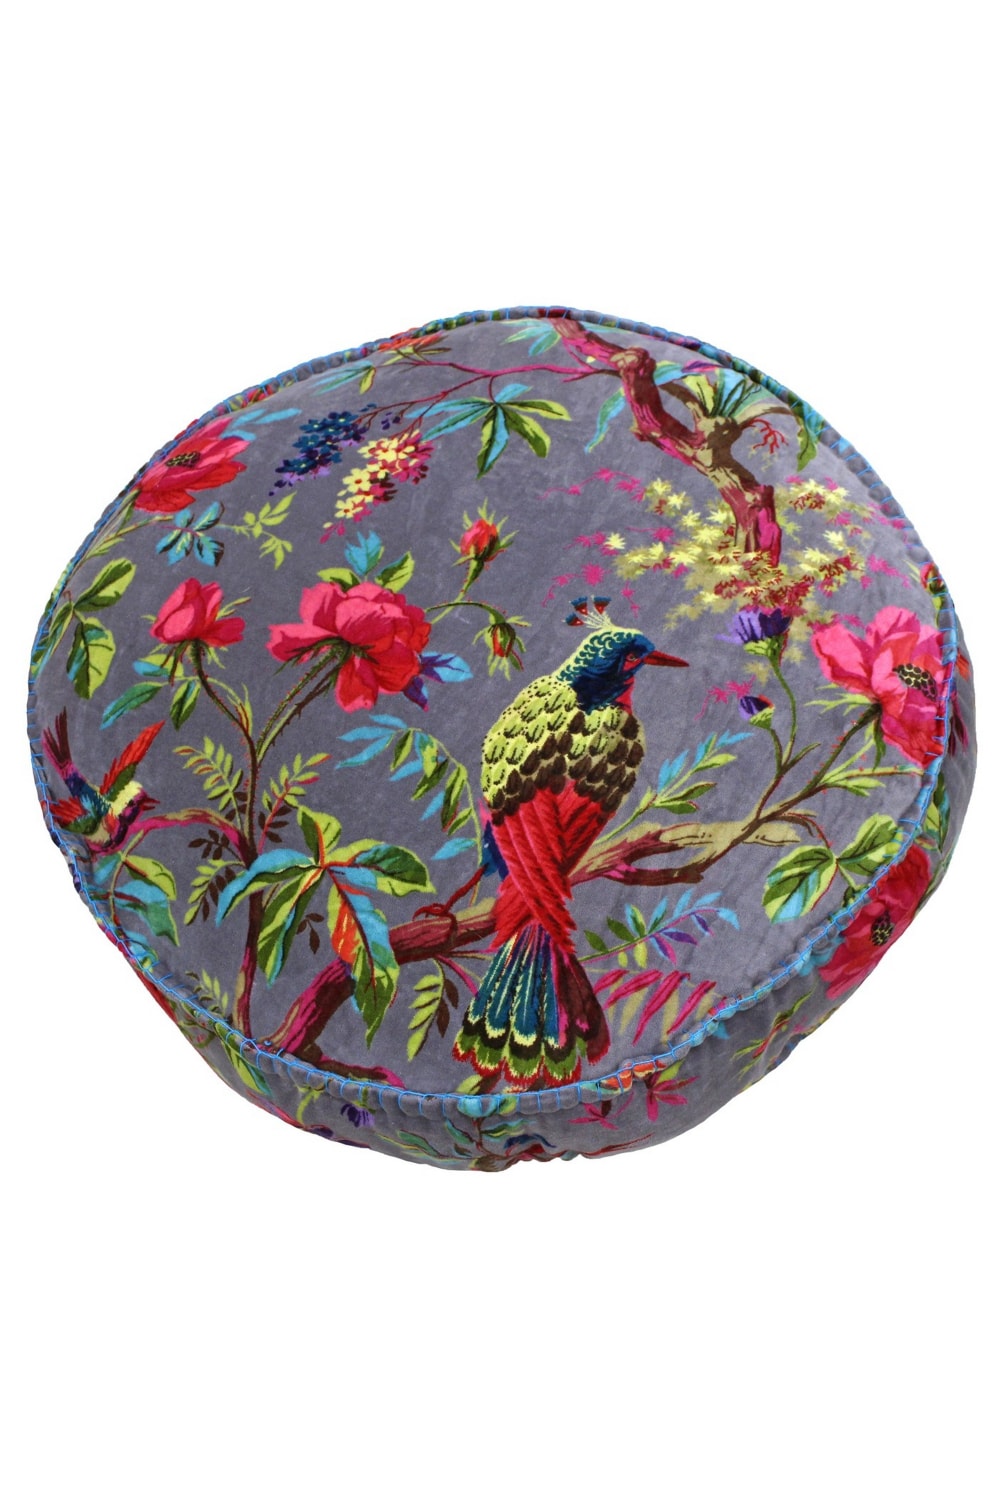 Riva Home Birds of Paradise Floral Pattern Round Cushion Cover